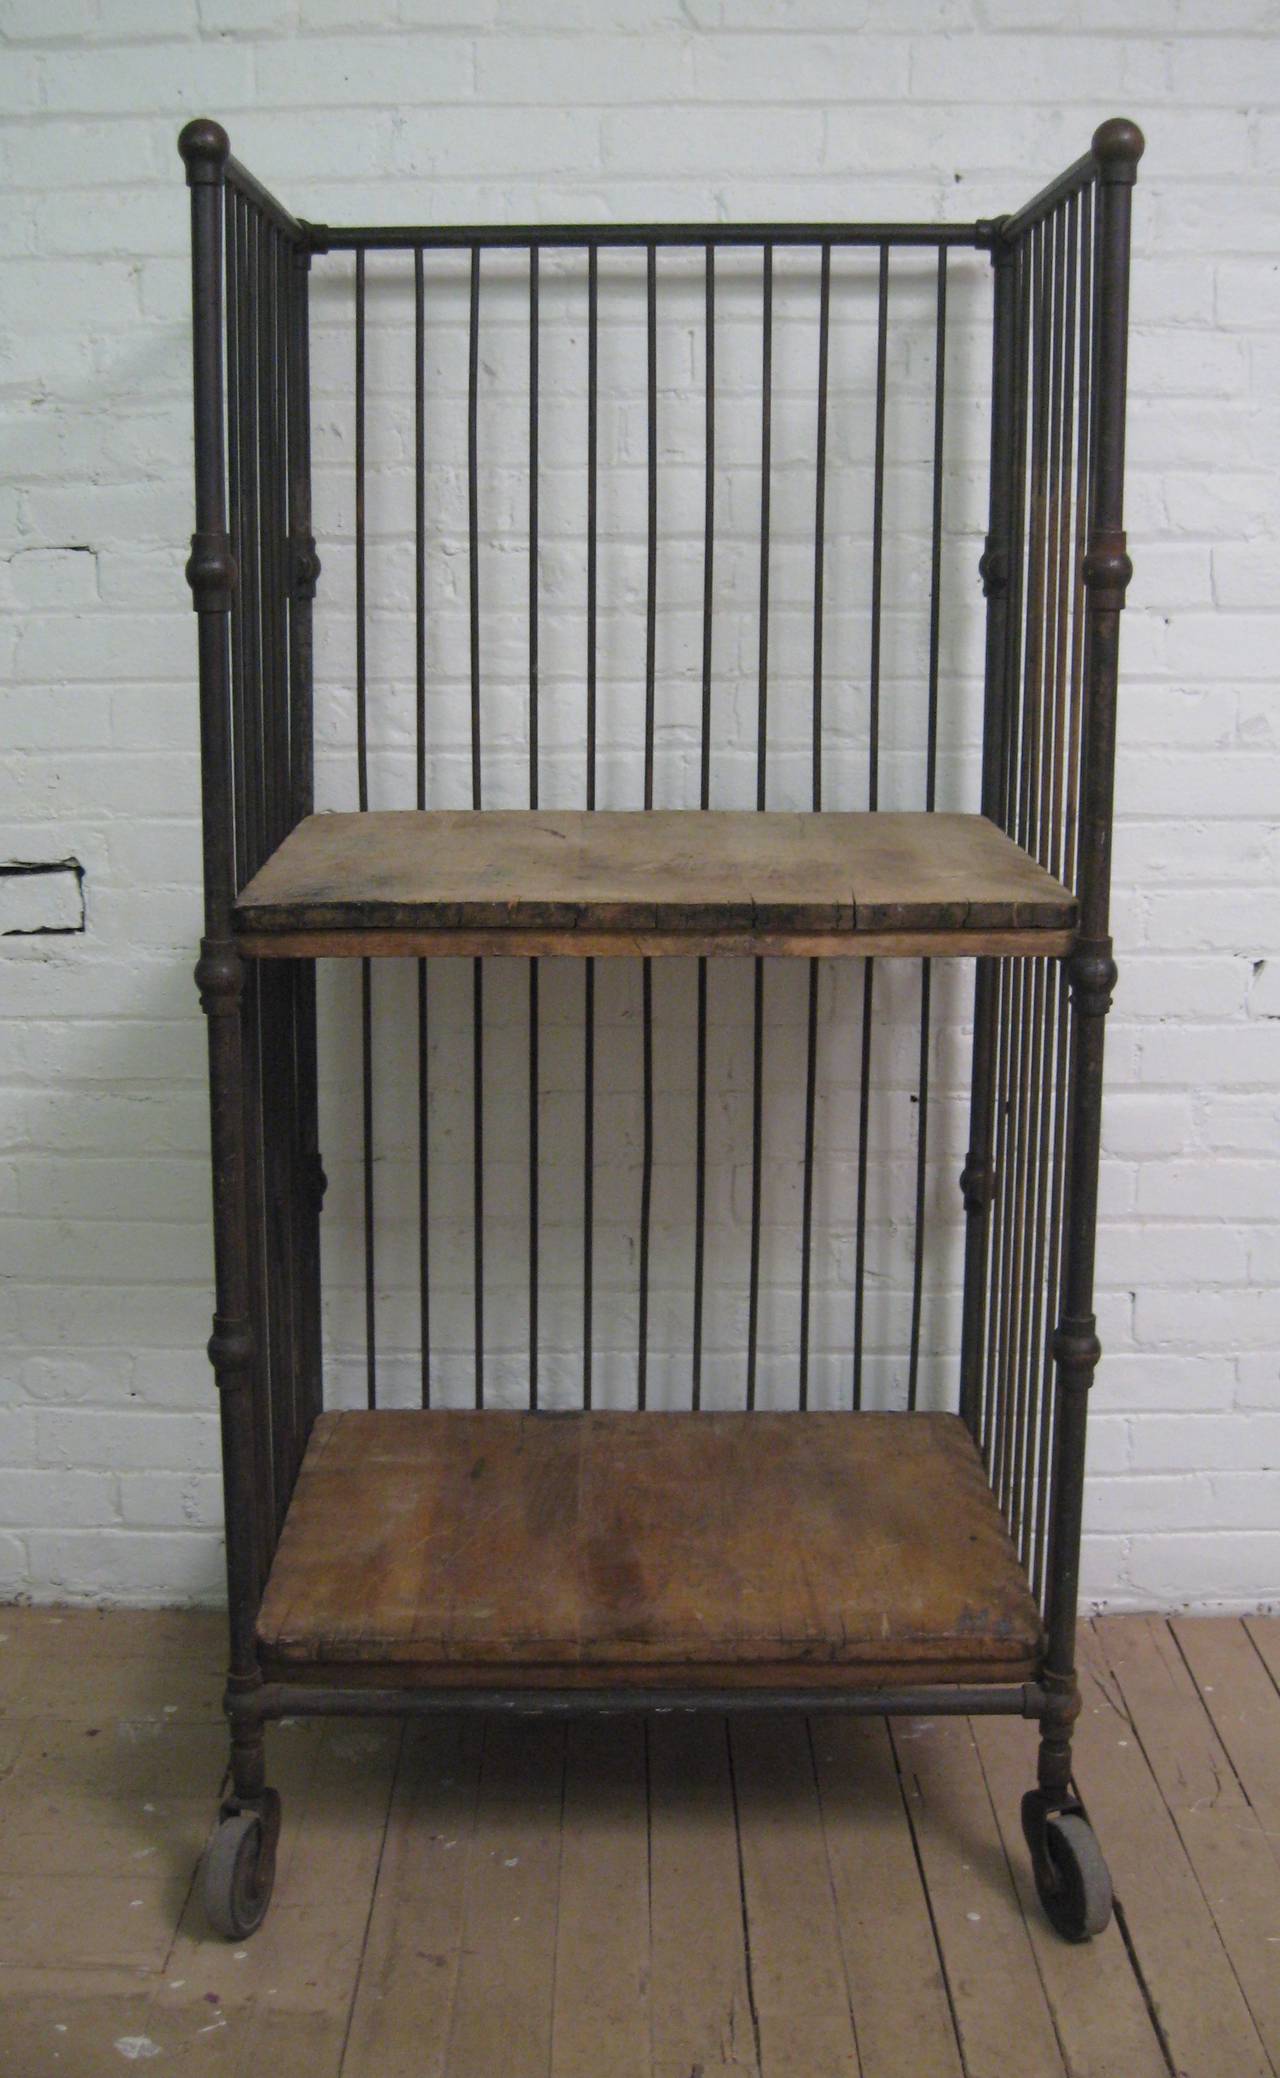 Fantastic deep rolling shelving unit, circa 1930-1940. Iron with two wood shelves on hard rubber wheels.